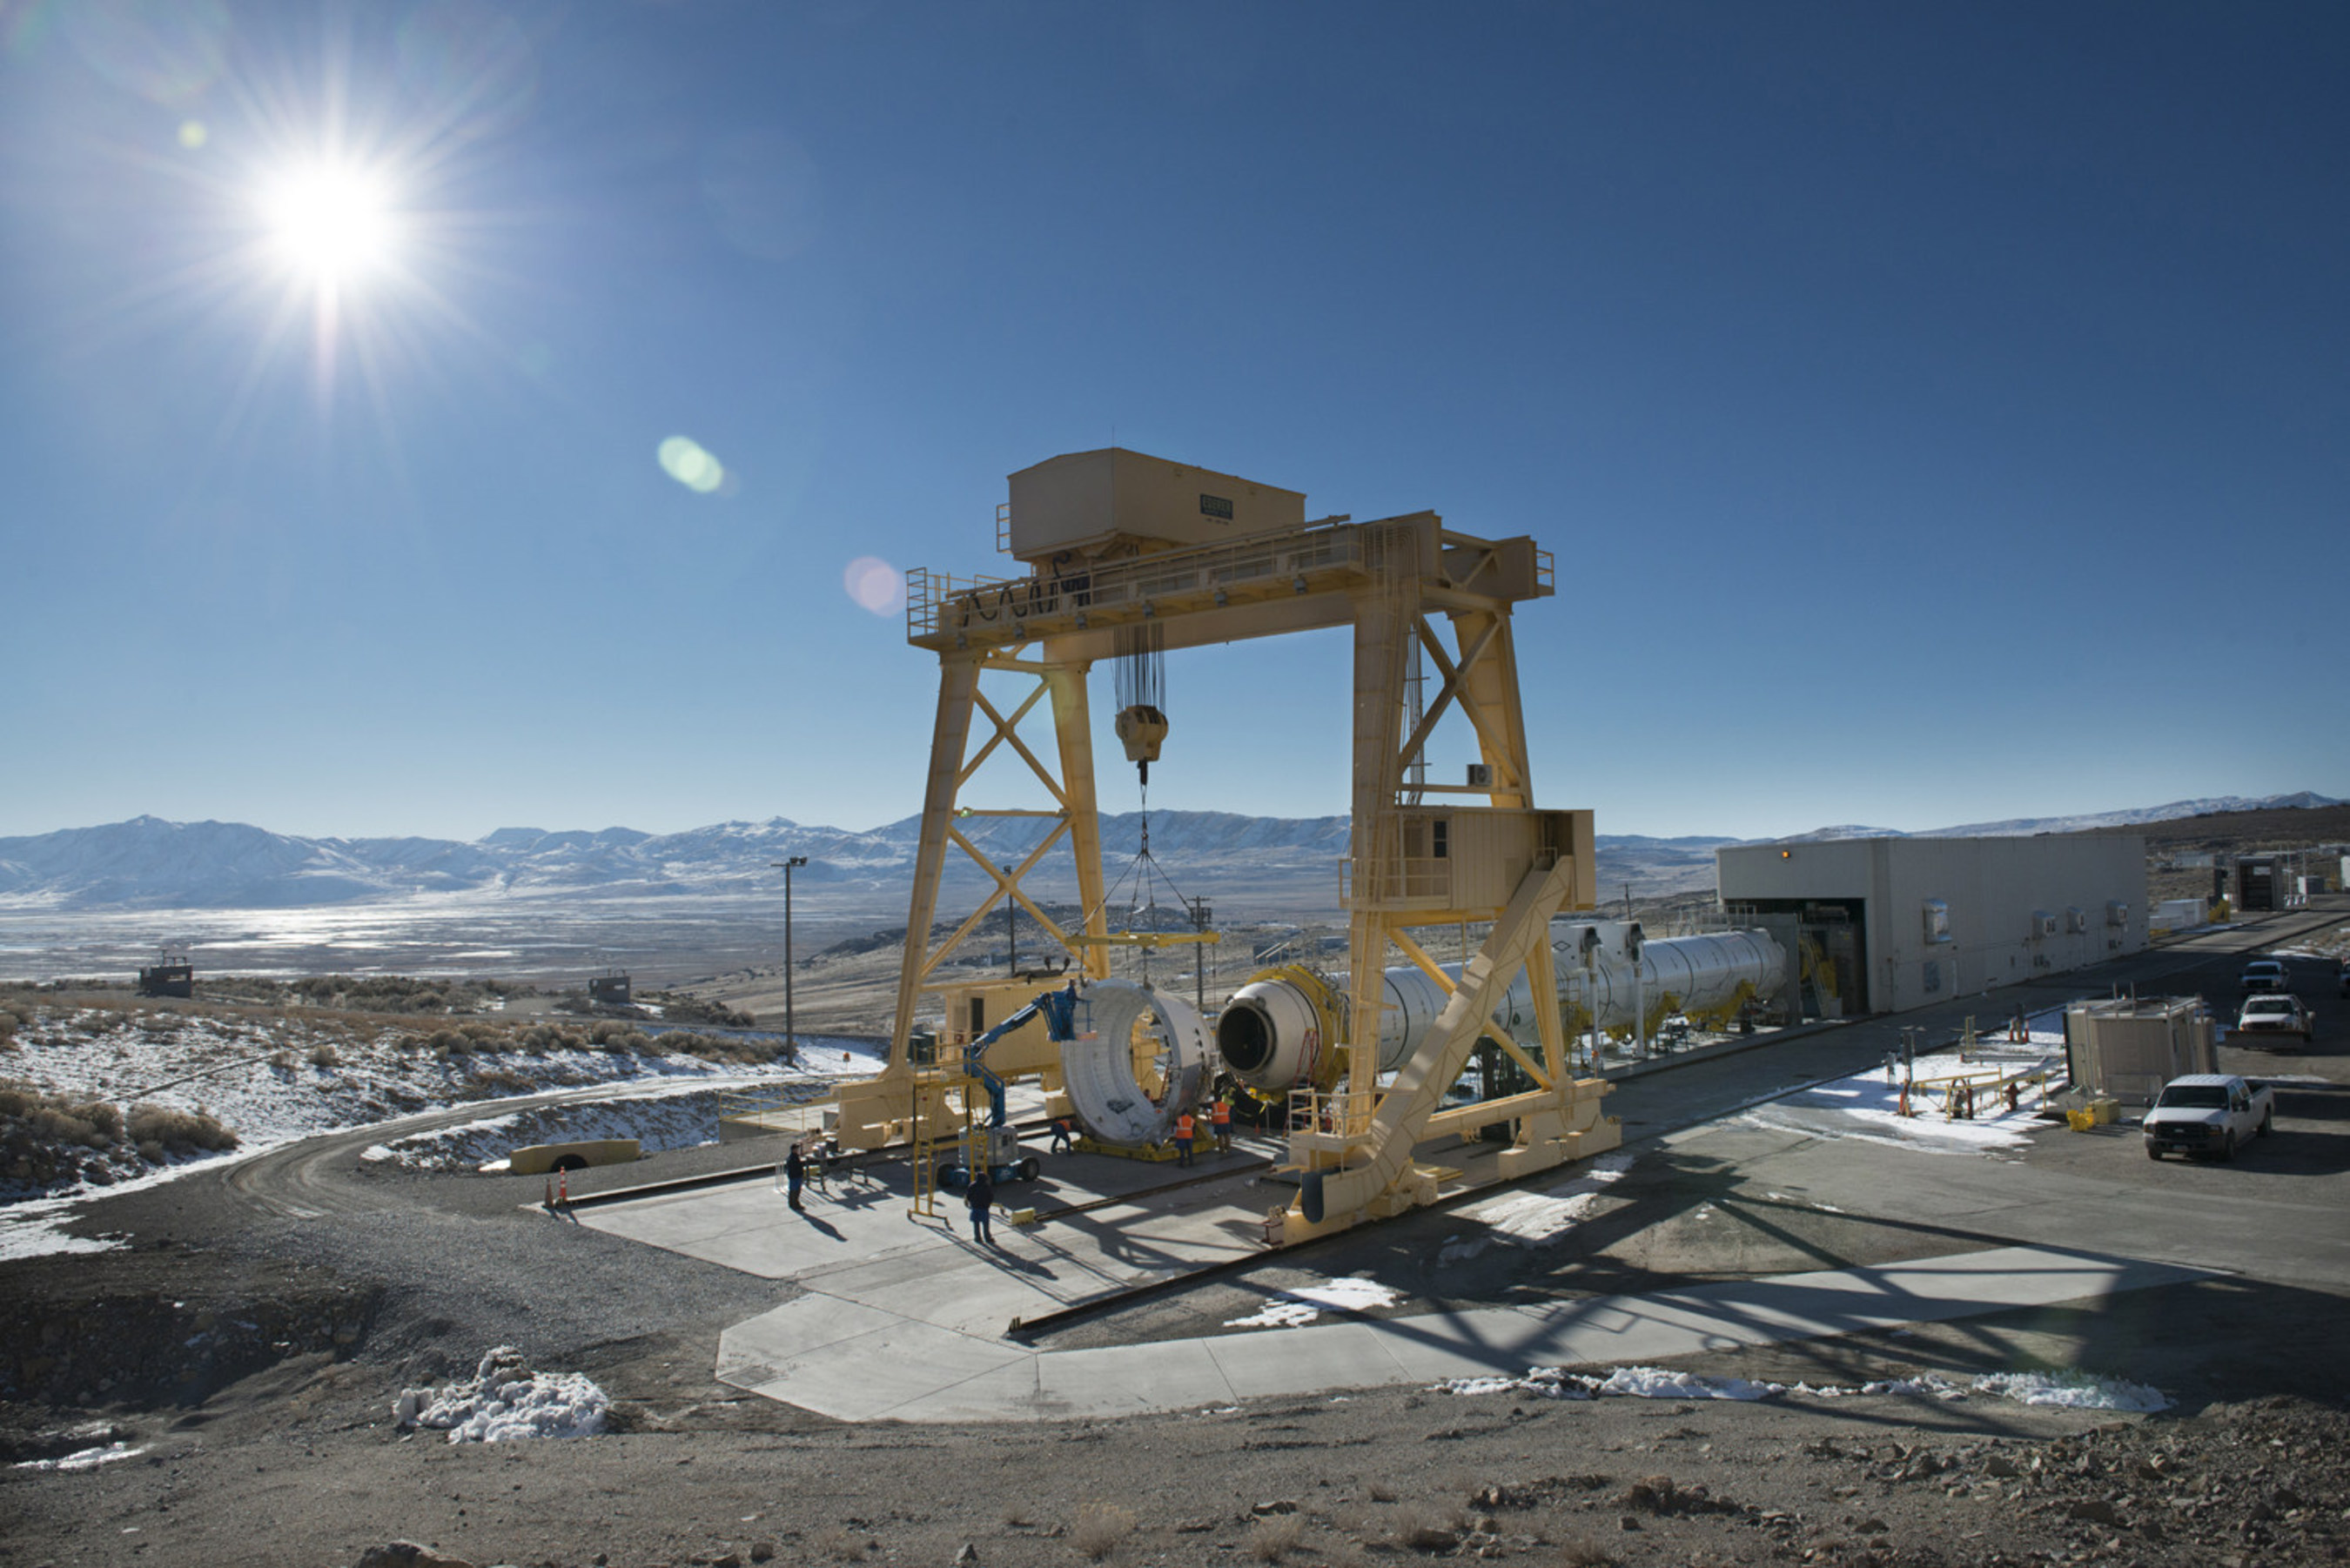 The first qualification motor for NASA's Space Launch Systems booster is installed in ATK's test stand in Utah - ready for a March 11 static-fire test.